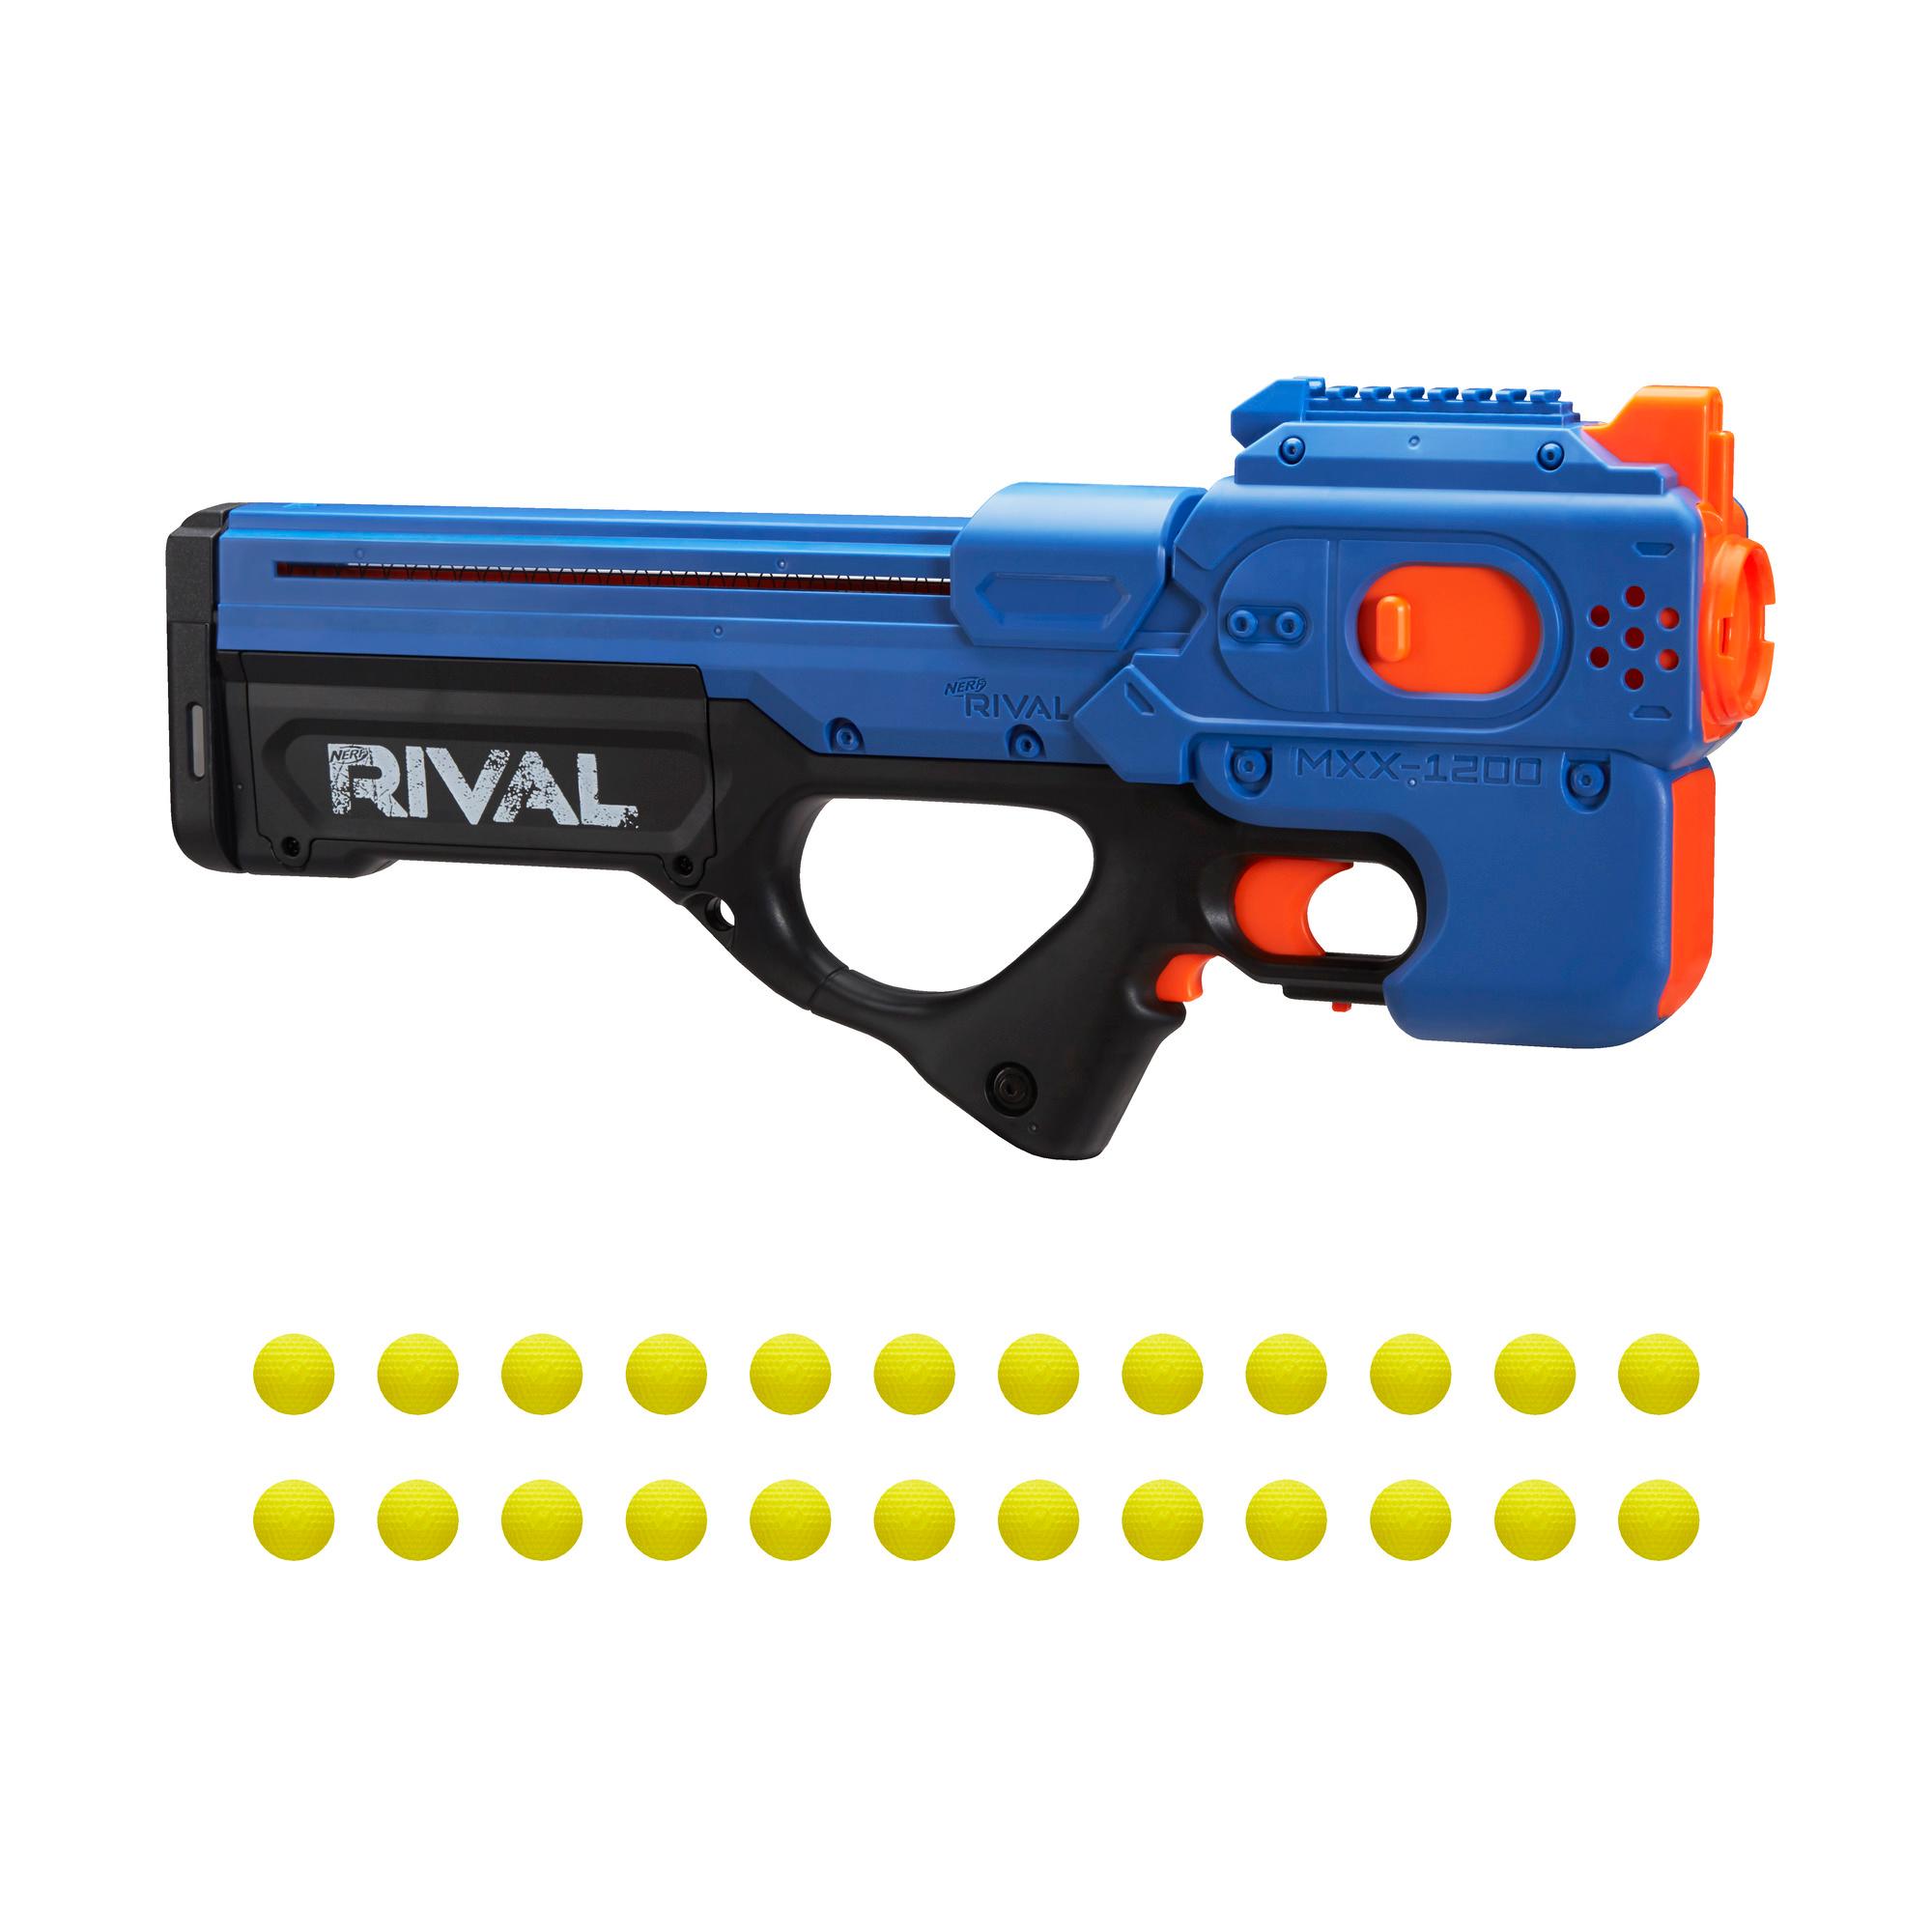 Tw291 NERF Rival Overwatch Balls 30x High Impact Rounds Refill for sale online 